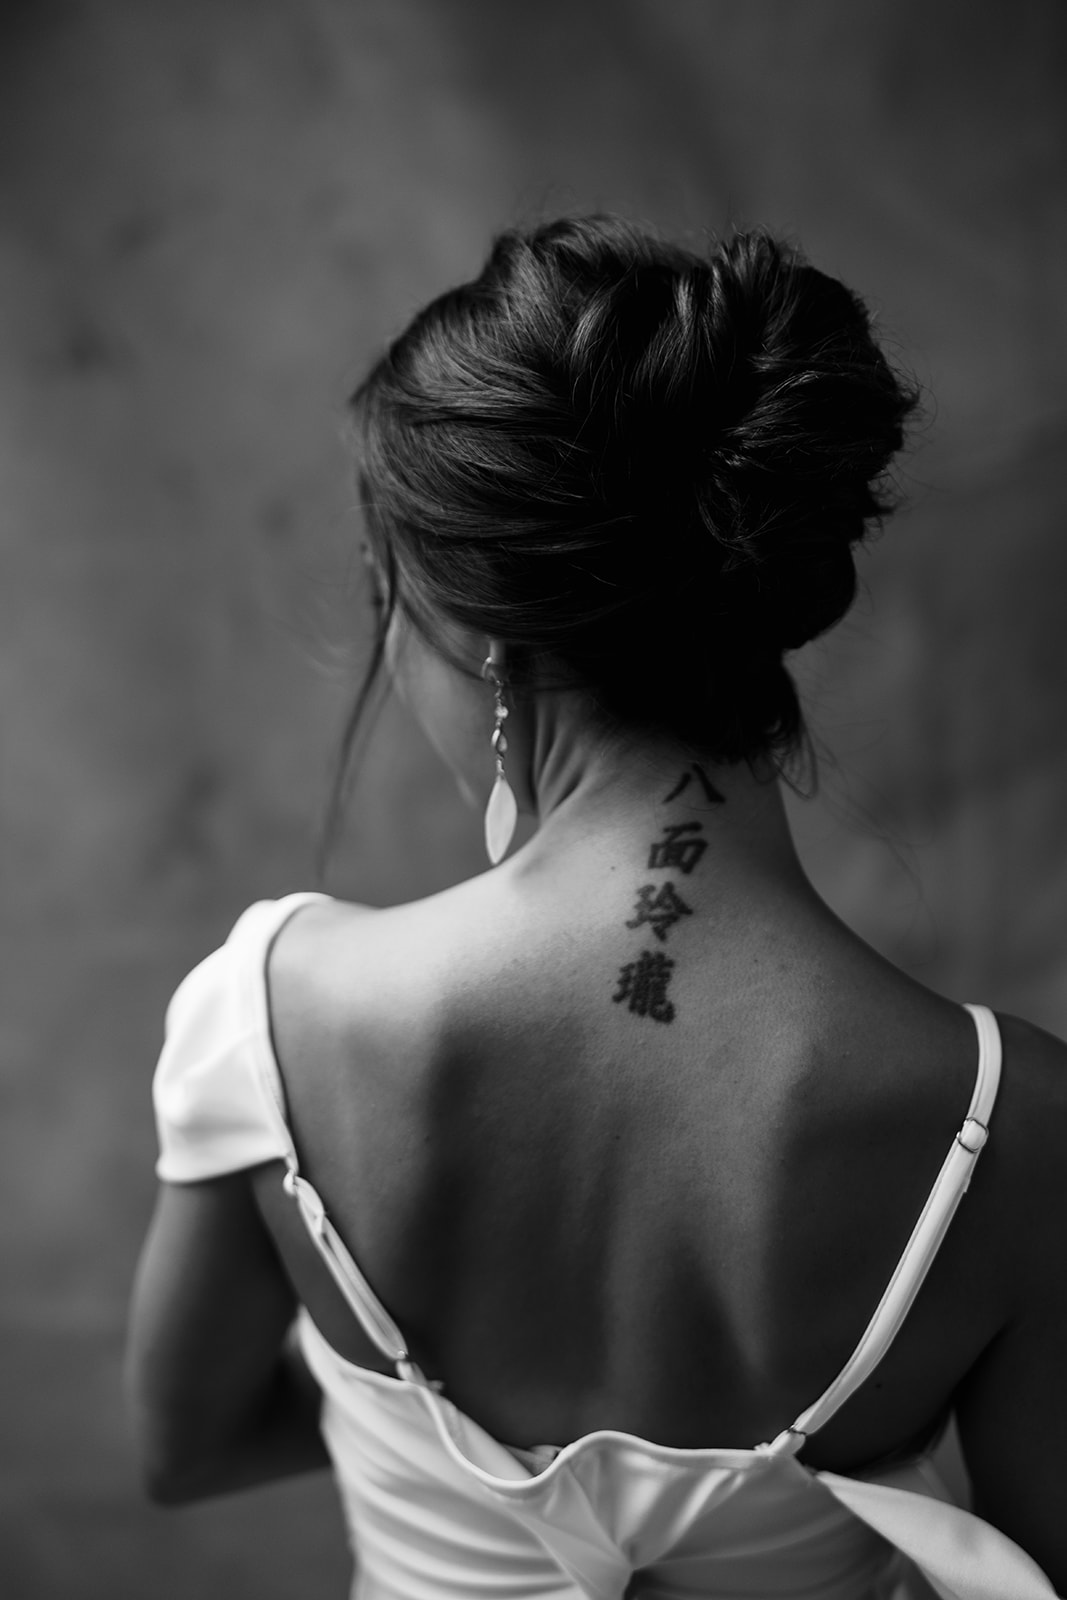 A black and white photo of a woman with a tattoo on her back.